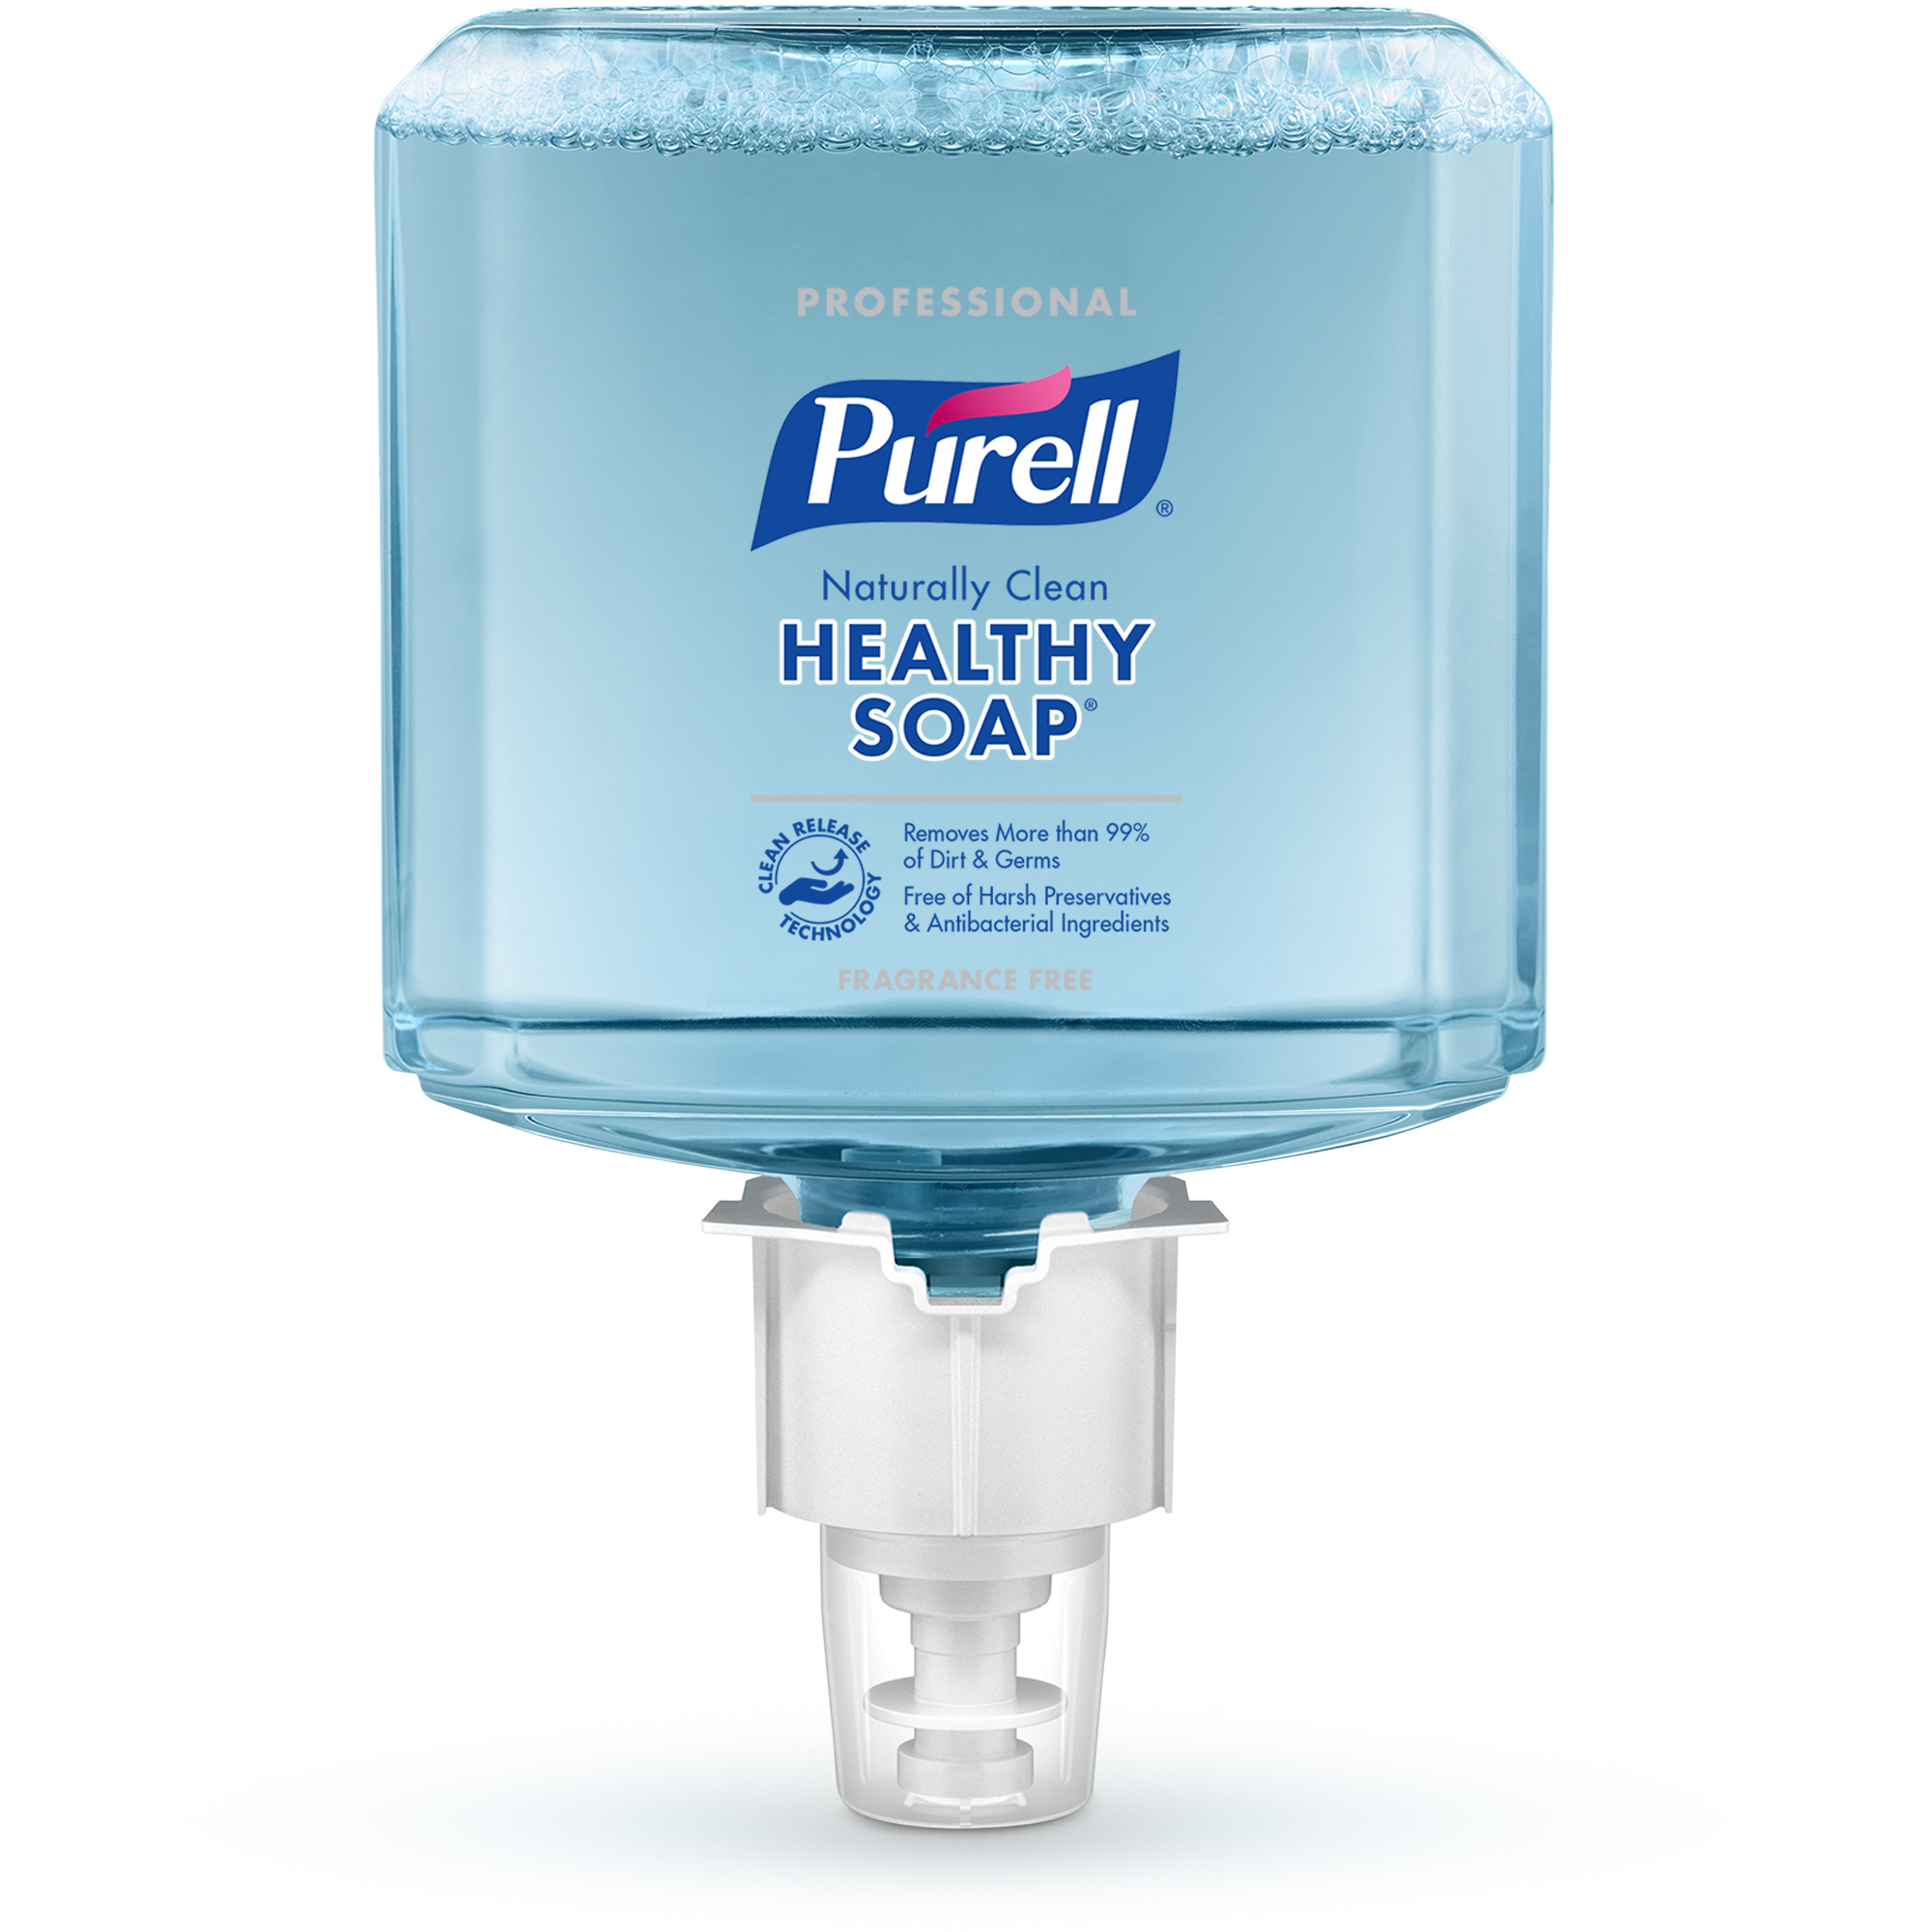 PURELL® Professional CRT HEALTHY SOAP Naturally Clean Fragrance Free Foam 1200 mL